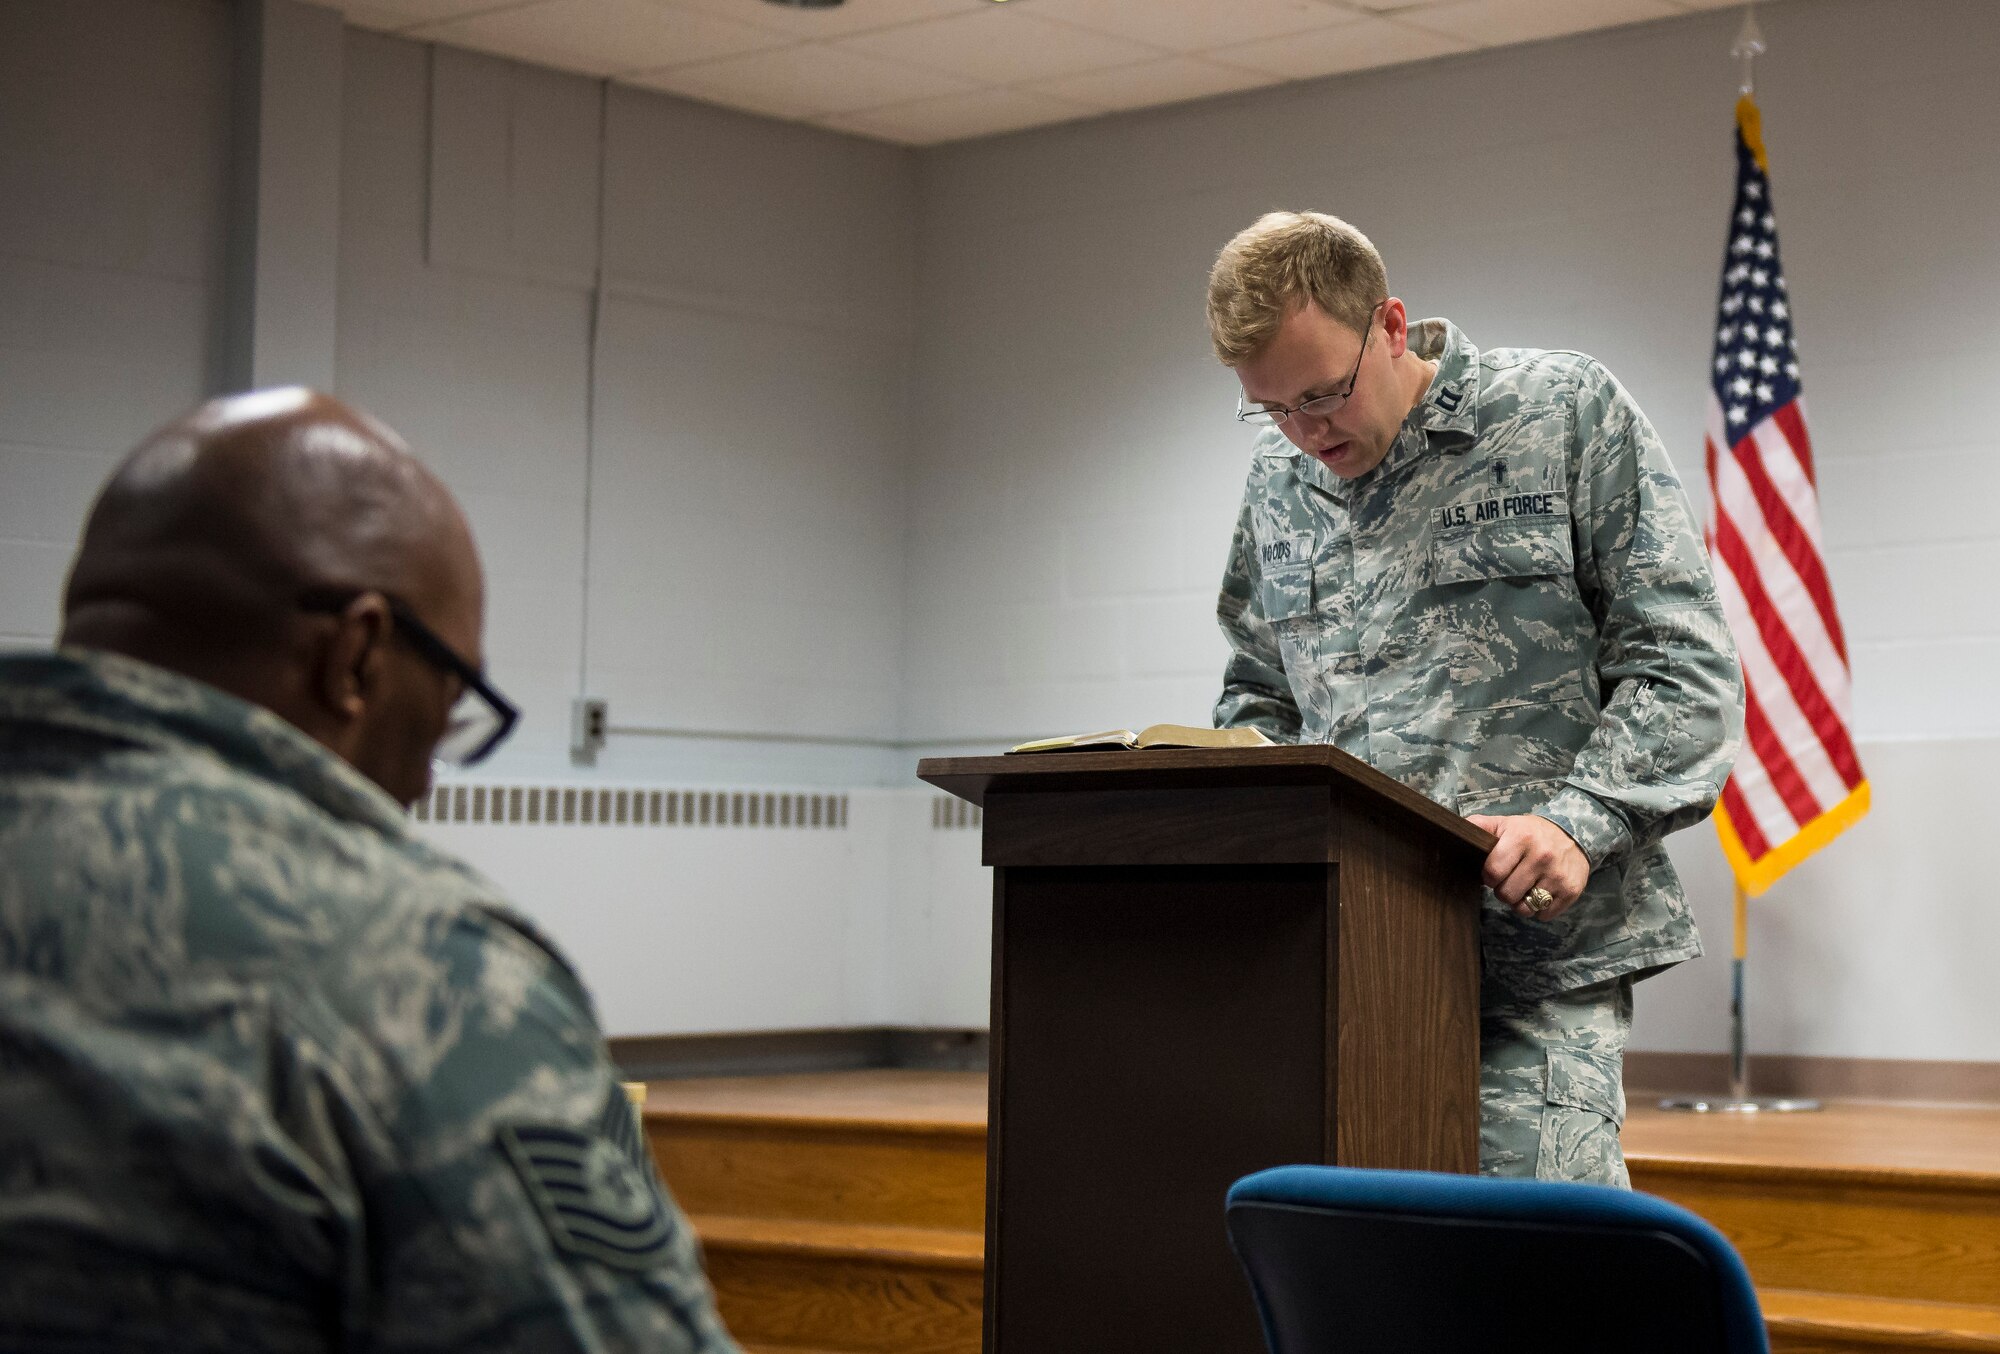 Captain Justin Woods, chaplain for the 459th Air Refueling Wing, delivers a sermon during the Protestant service June 5 on Joint Base Andrews, Maryland. The 459th ARW chaplain team won the 2015 Air Force Reserve Command Outstanding Chaplain Corps Program team award for its work throughout the year. (U.S. Air Force/SSgt Scott Pauley)